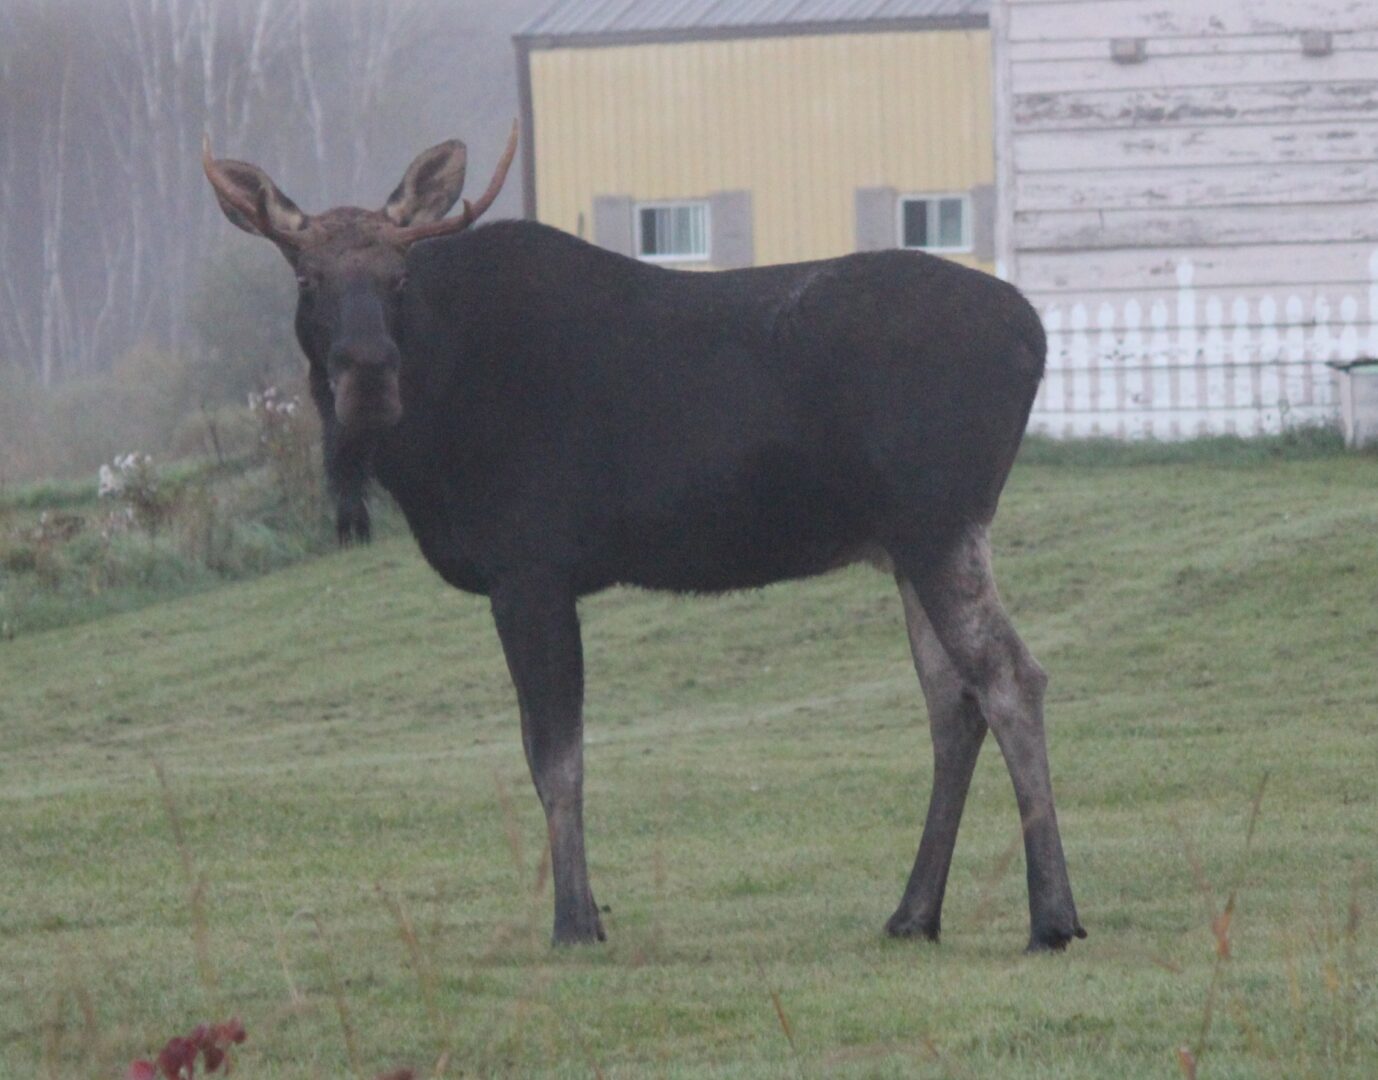 Image of a moose on a lawn